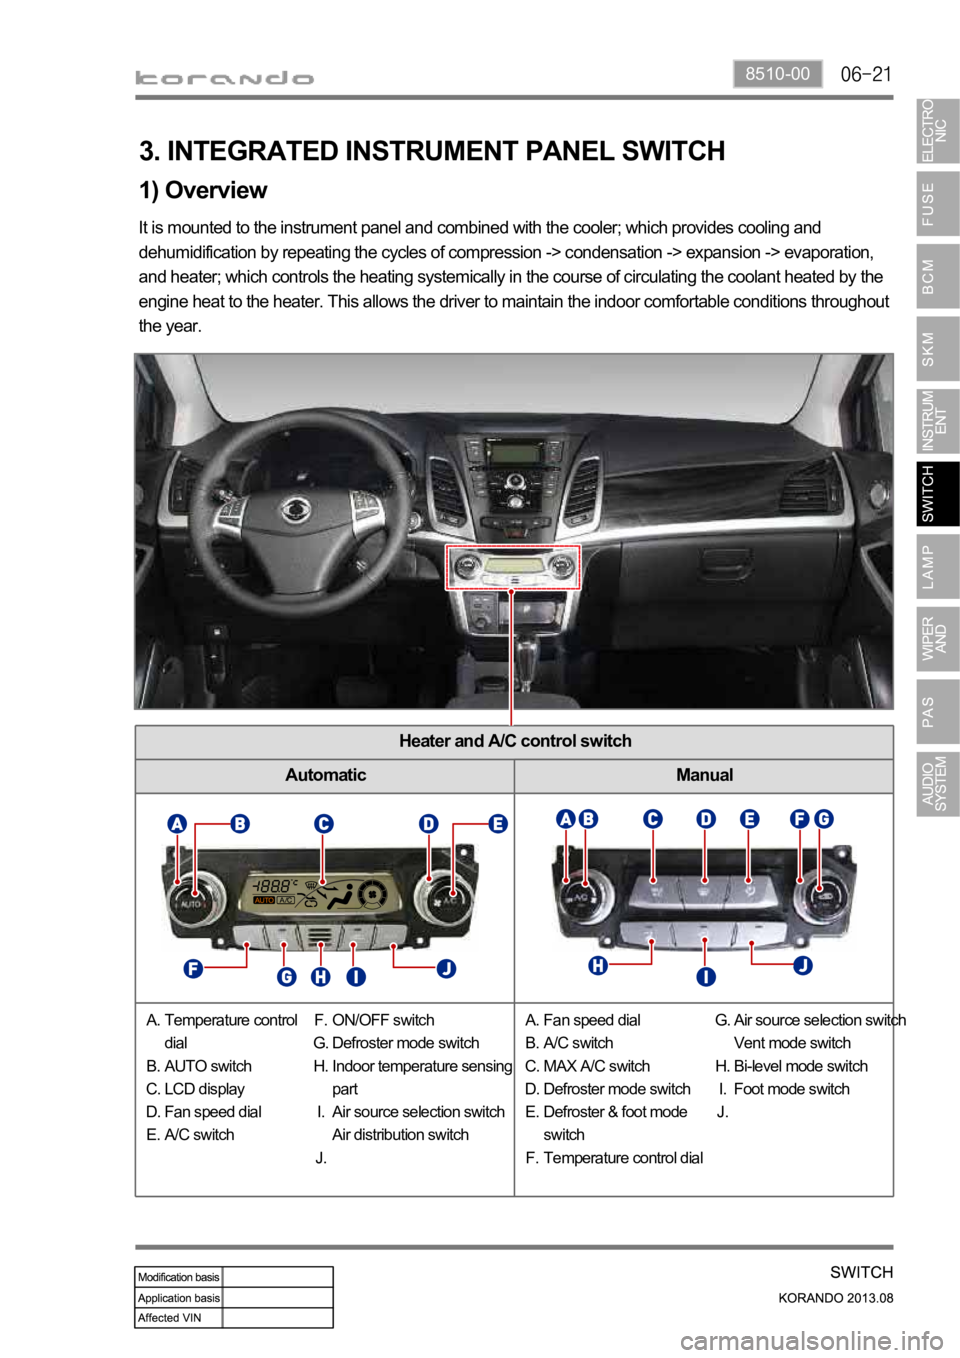 SSANGYONG KORANDO 2013  Service Manual 8510-00
Heater and A/C control switch
Automatic Manual
1) Overview
3. INTEGRATED INSTRUMENT PANEL SWITCH
It is mounted to the instrument panel and combined with the cooler; which provides cooling and 